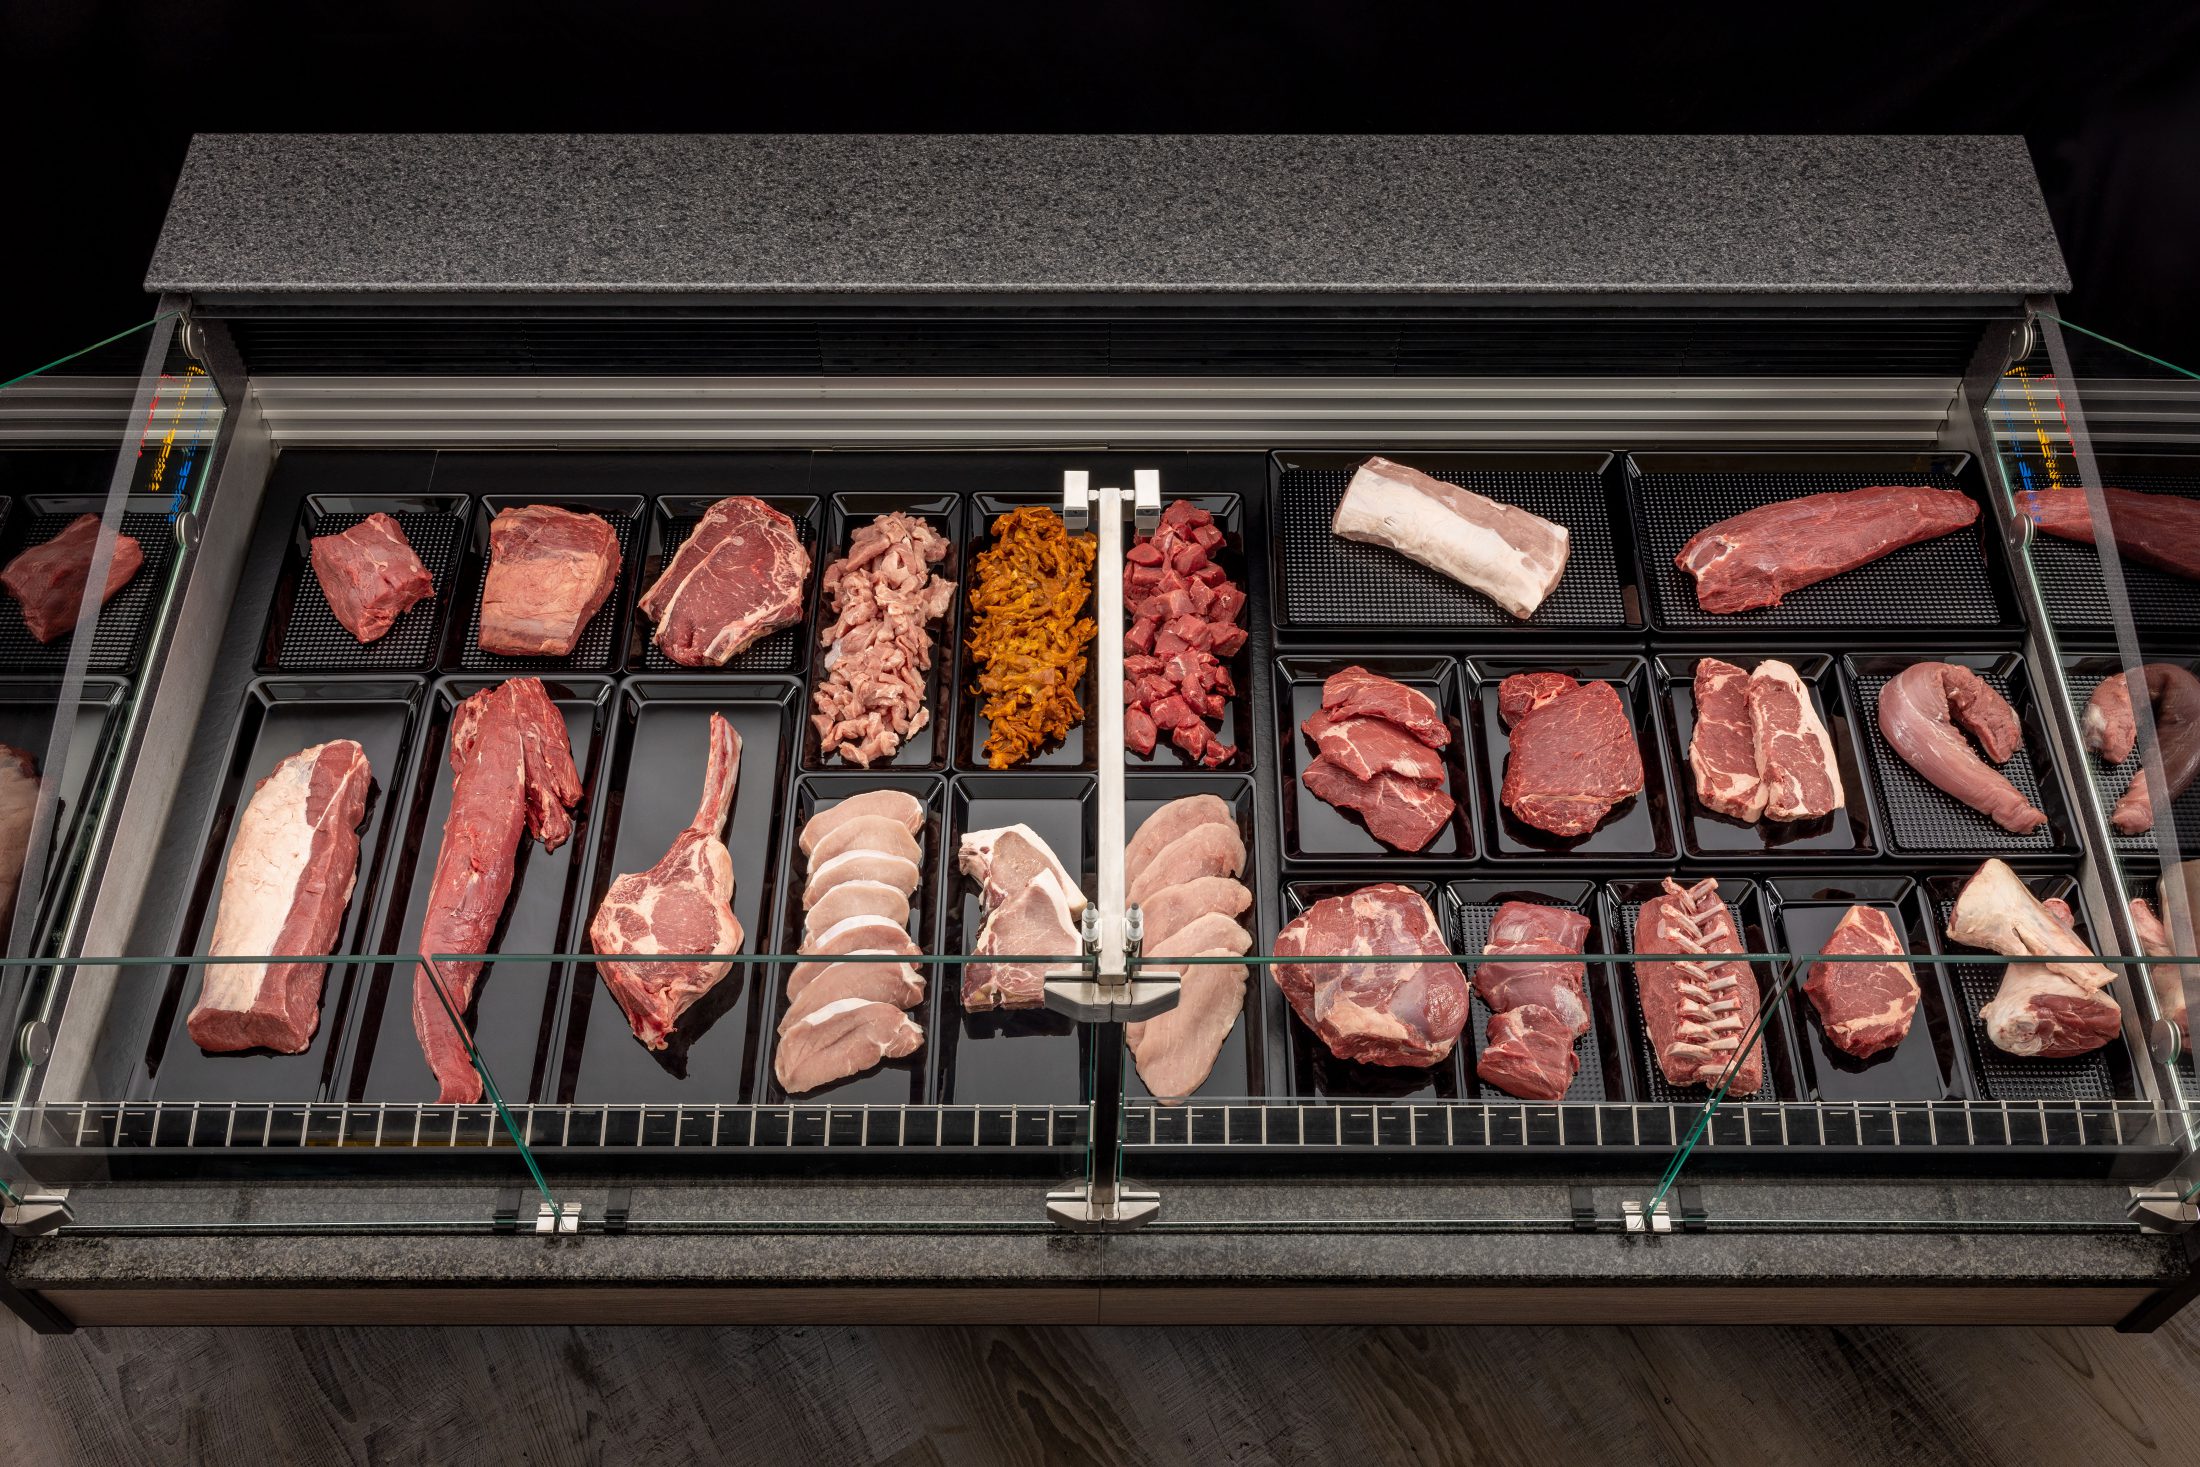 Modular presentation systems with meat